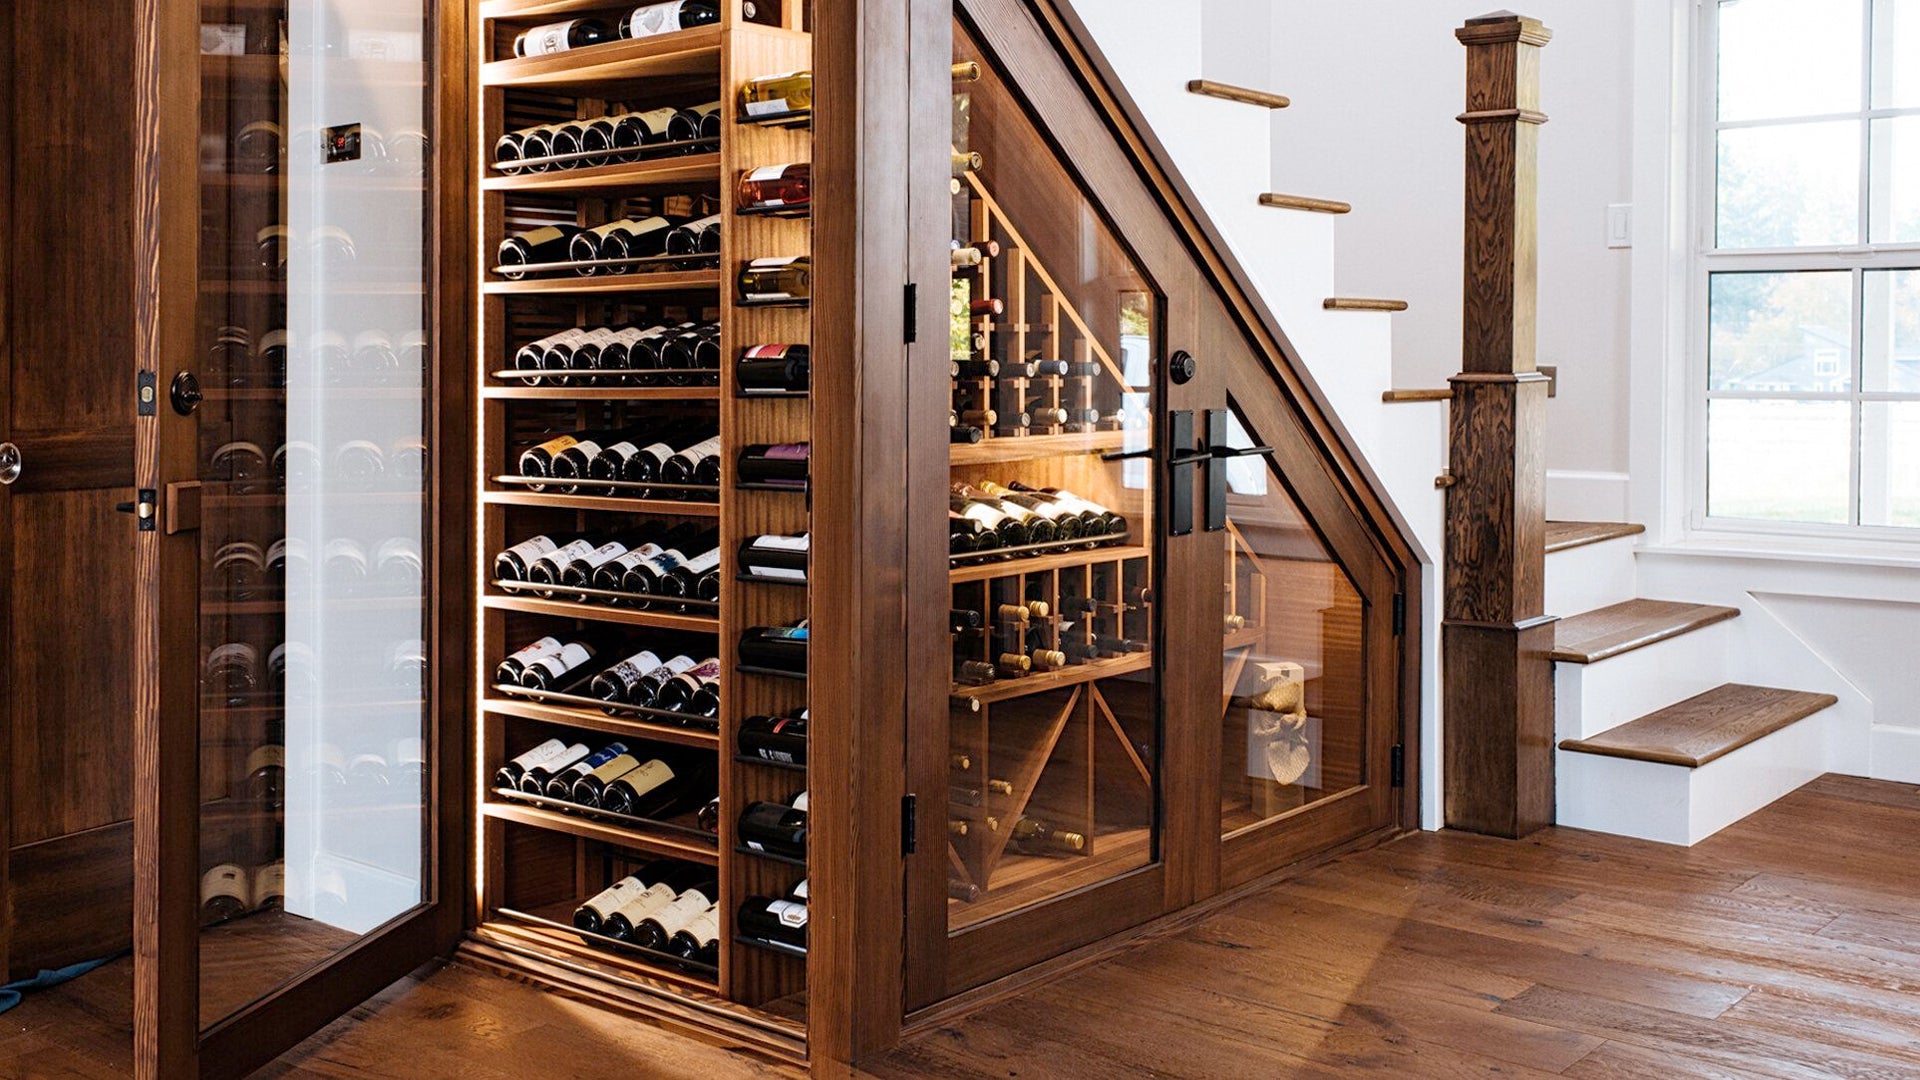 7+ Proper Ways to Store Your Wine